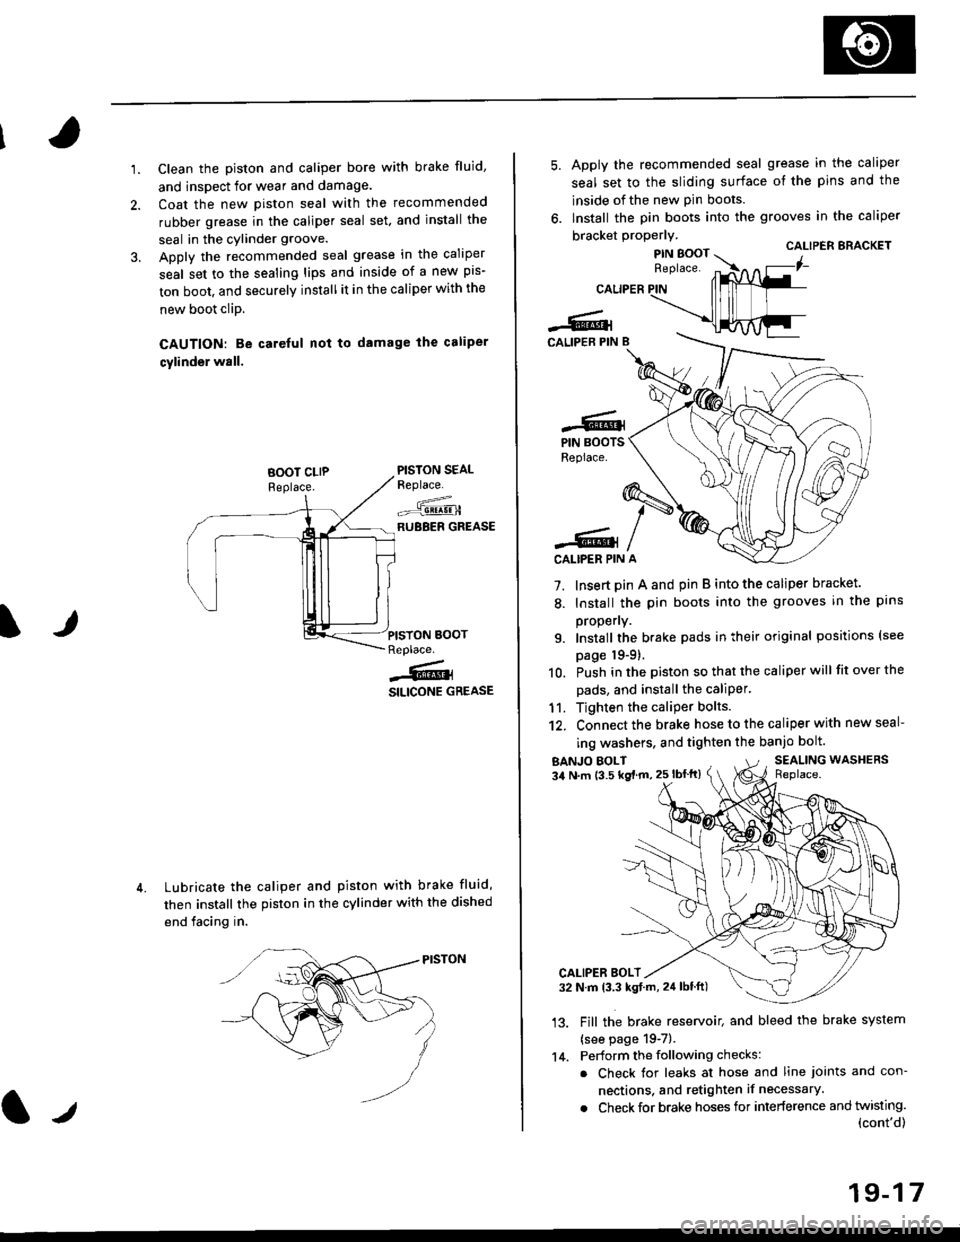 HONDA CIVIC 1996 6.G Workshop Manual 1.Clean the piston and caliper bore with brake fluid,
and inspect for wear and damage.
Coat the new piston seal with the recommended
rubber grease in the caliper seal set. and install the
seal in the